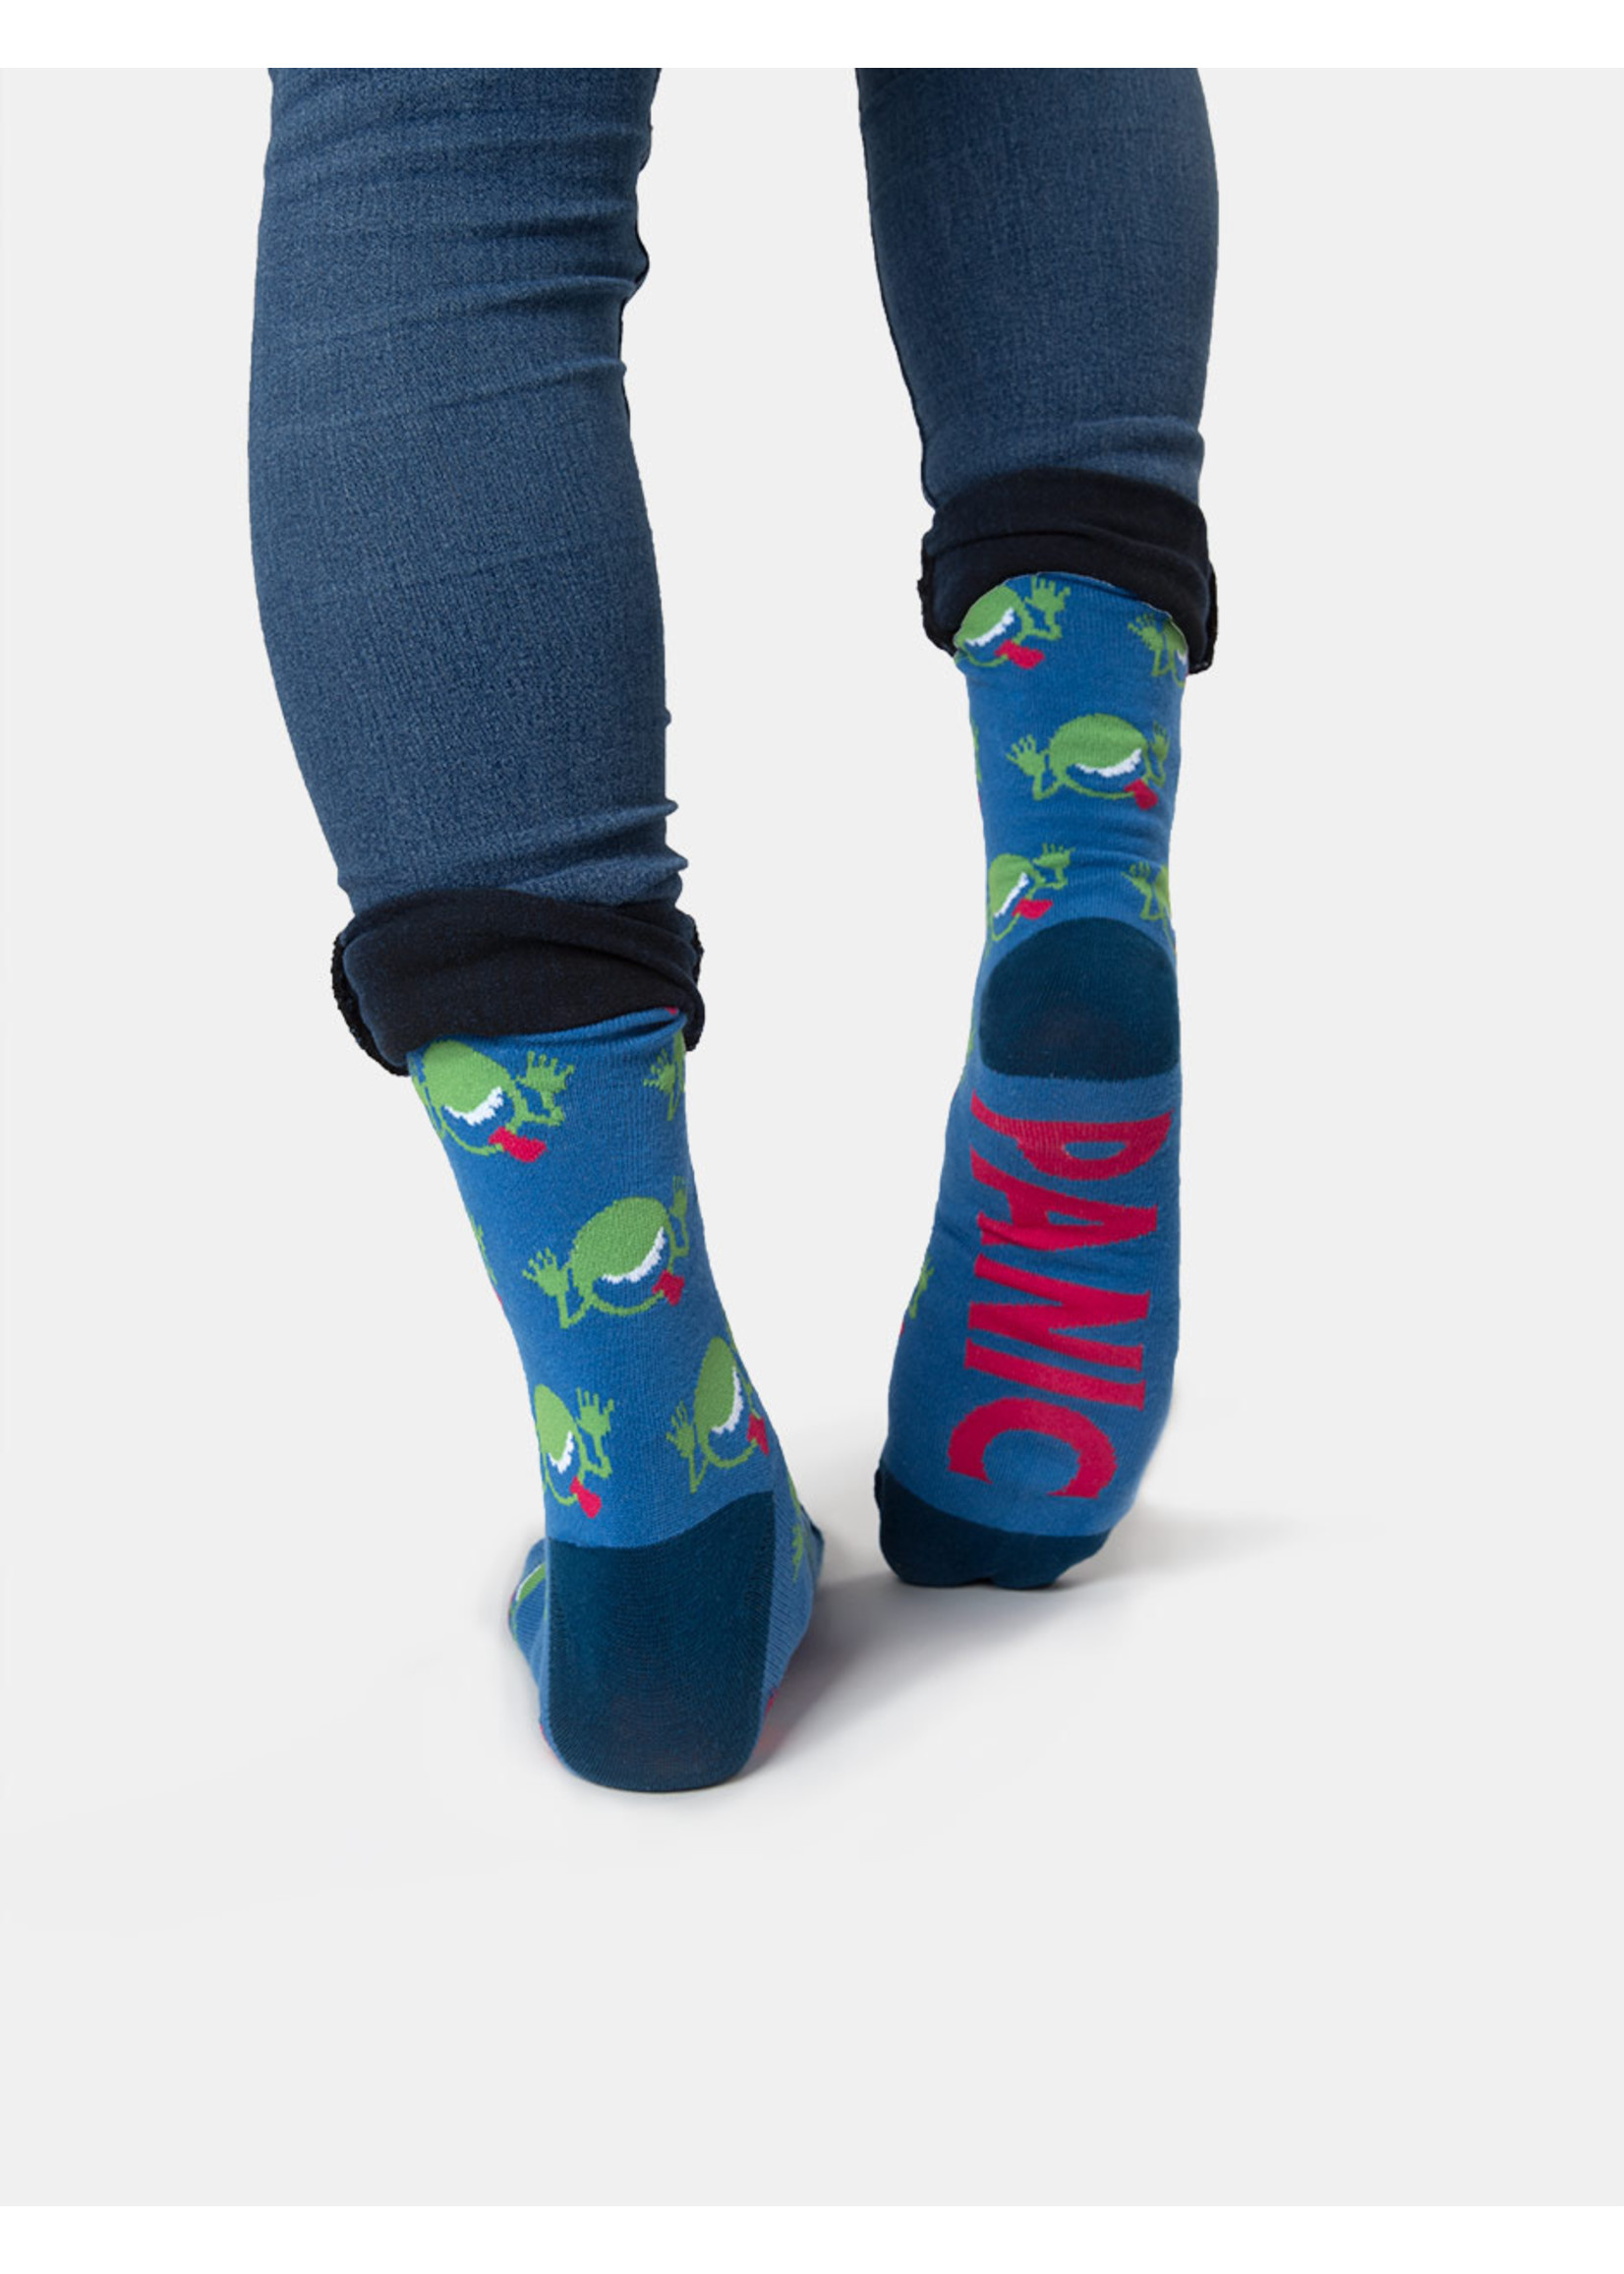 Out of Print The Hitchhiker's Guide to the Galaxy Socks - Adult